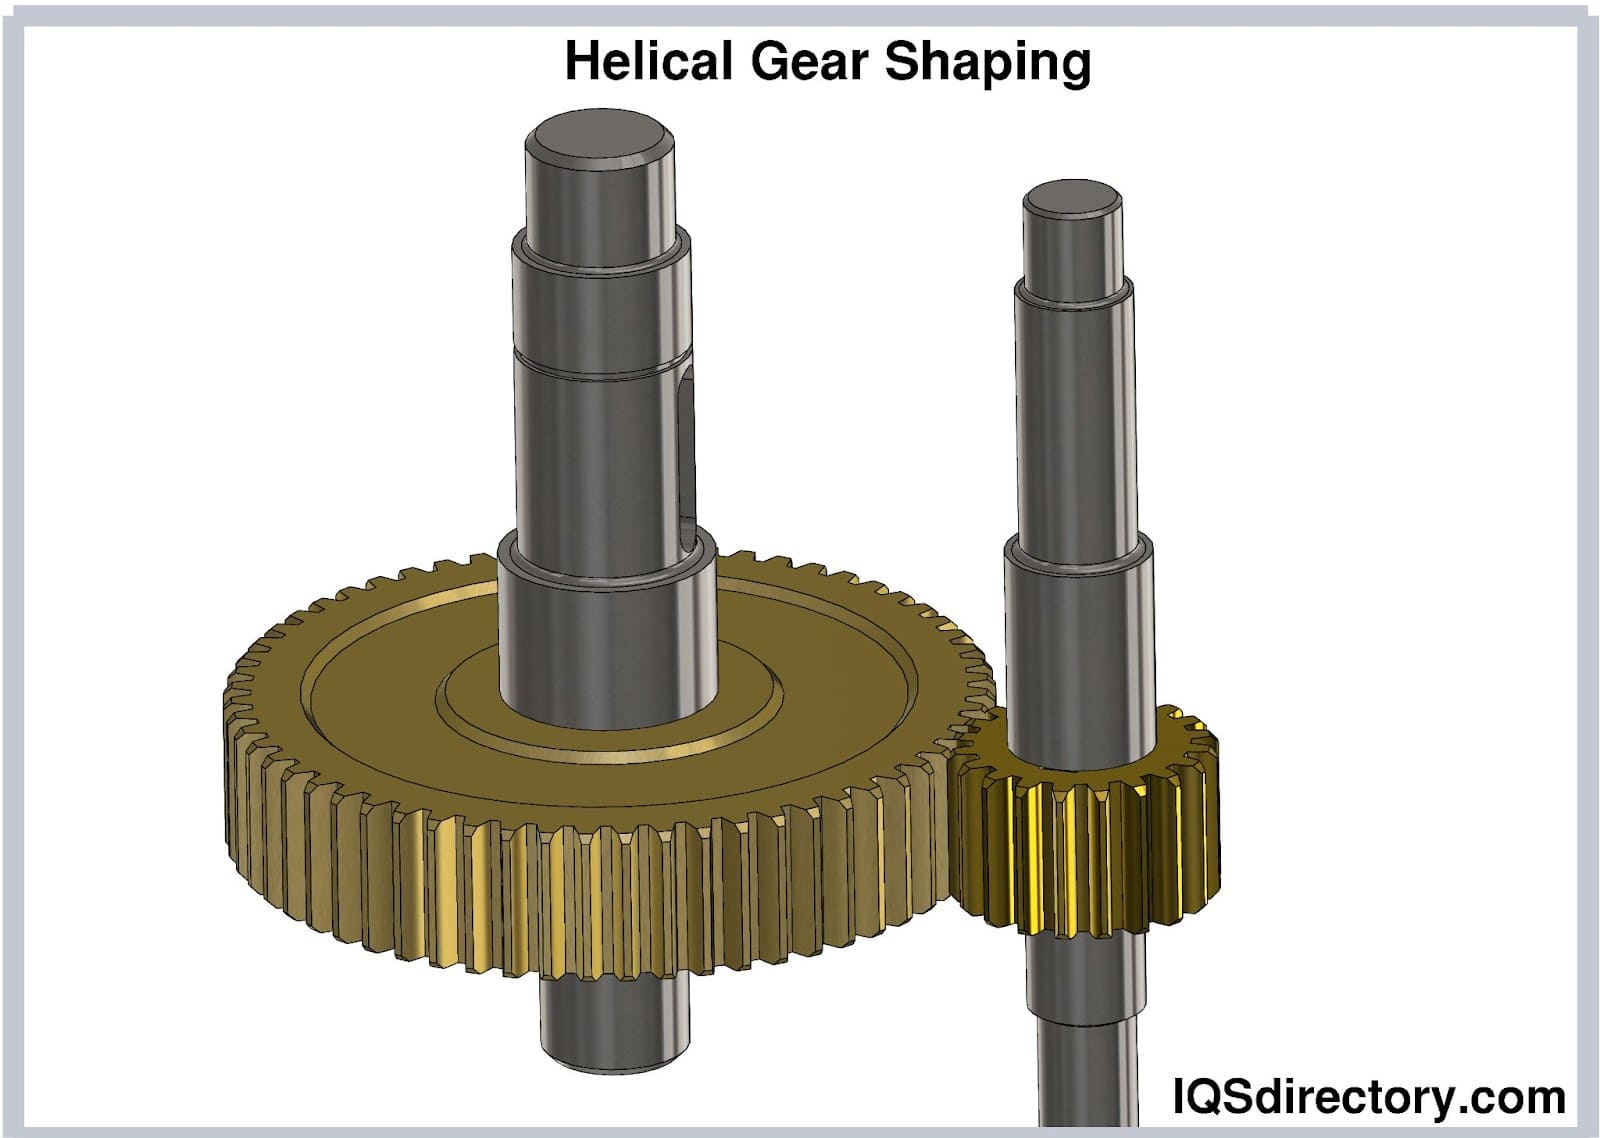 Helical Gear Shaping